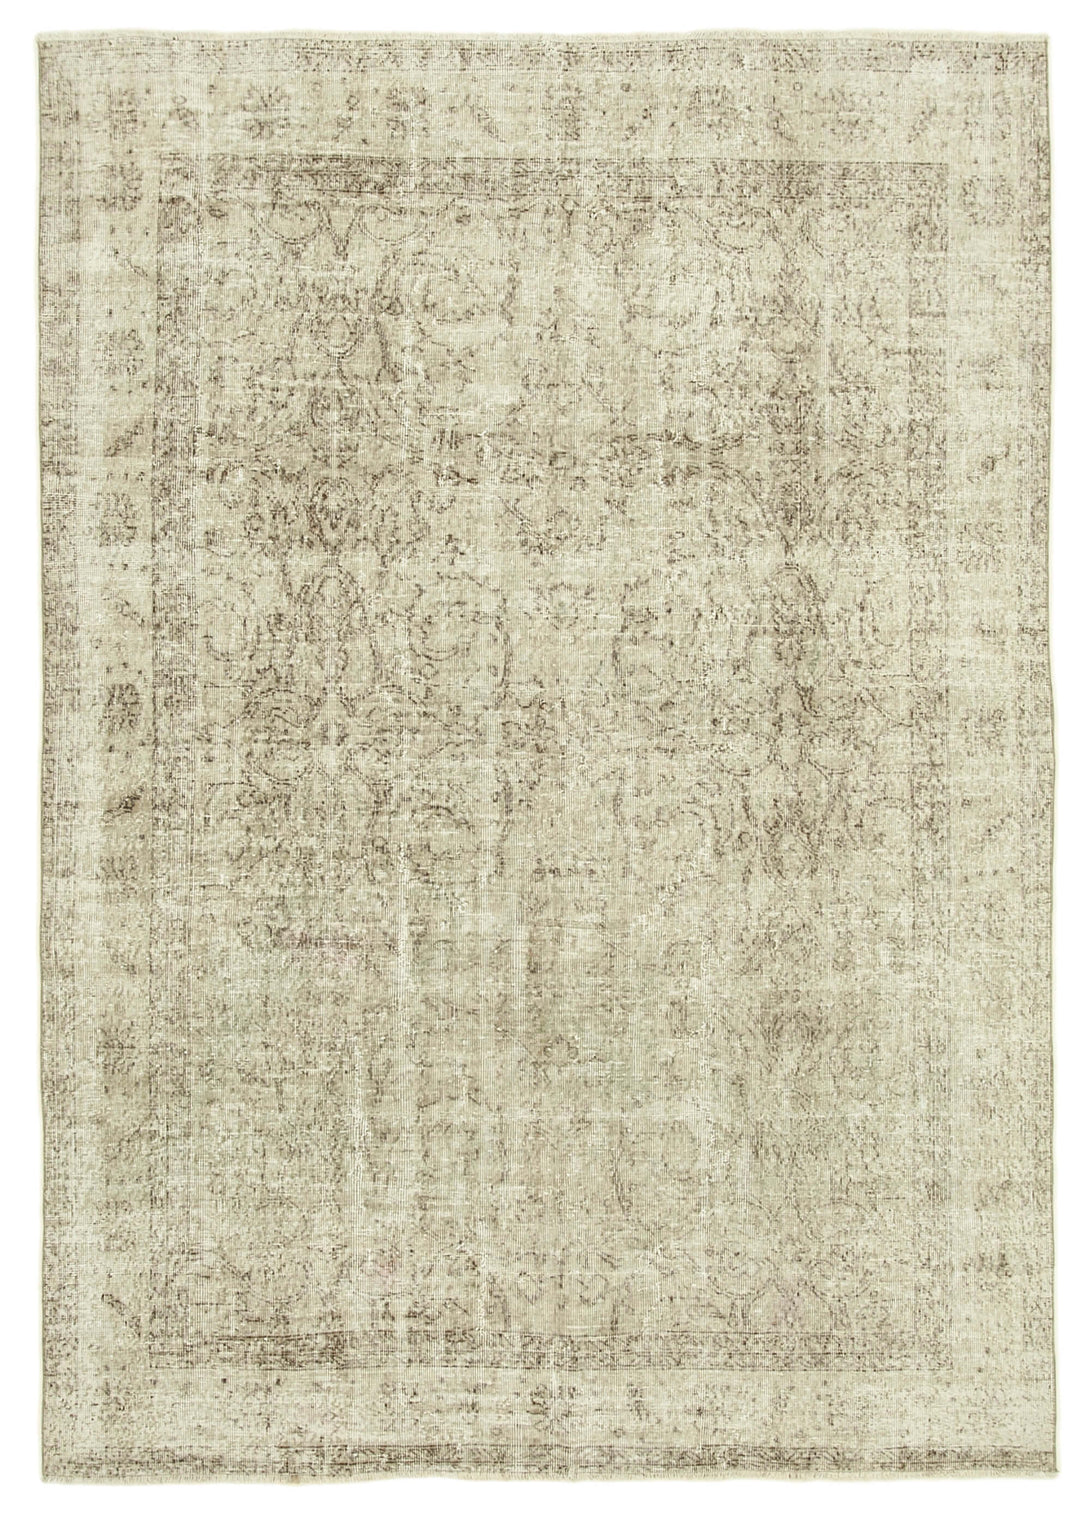 Handmade White Wash Area Rug > Design# OL-AC-38831 > Size: 7'-1" x 10'-2", Carpet Culture Rugs, Handmade Rugs, NYC Rugs, New Rugs, Shop Rugs, Rug Store, Outlet Rugs, SoHo Rugs, Rugs in USA